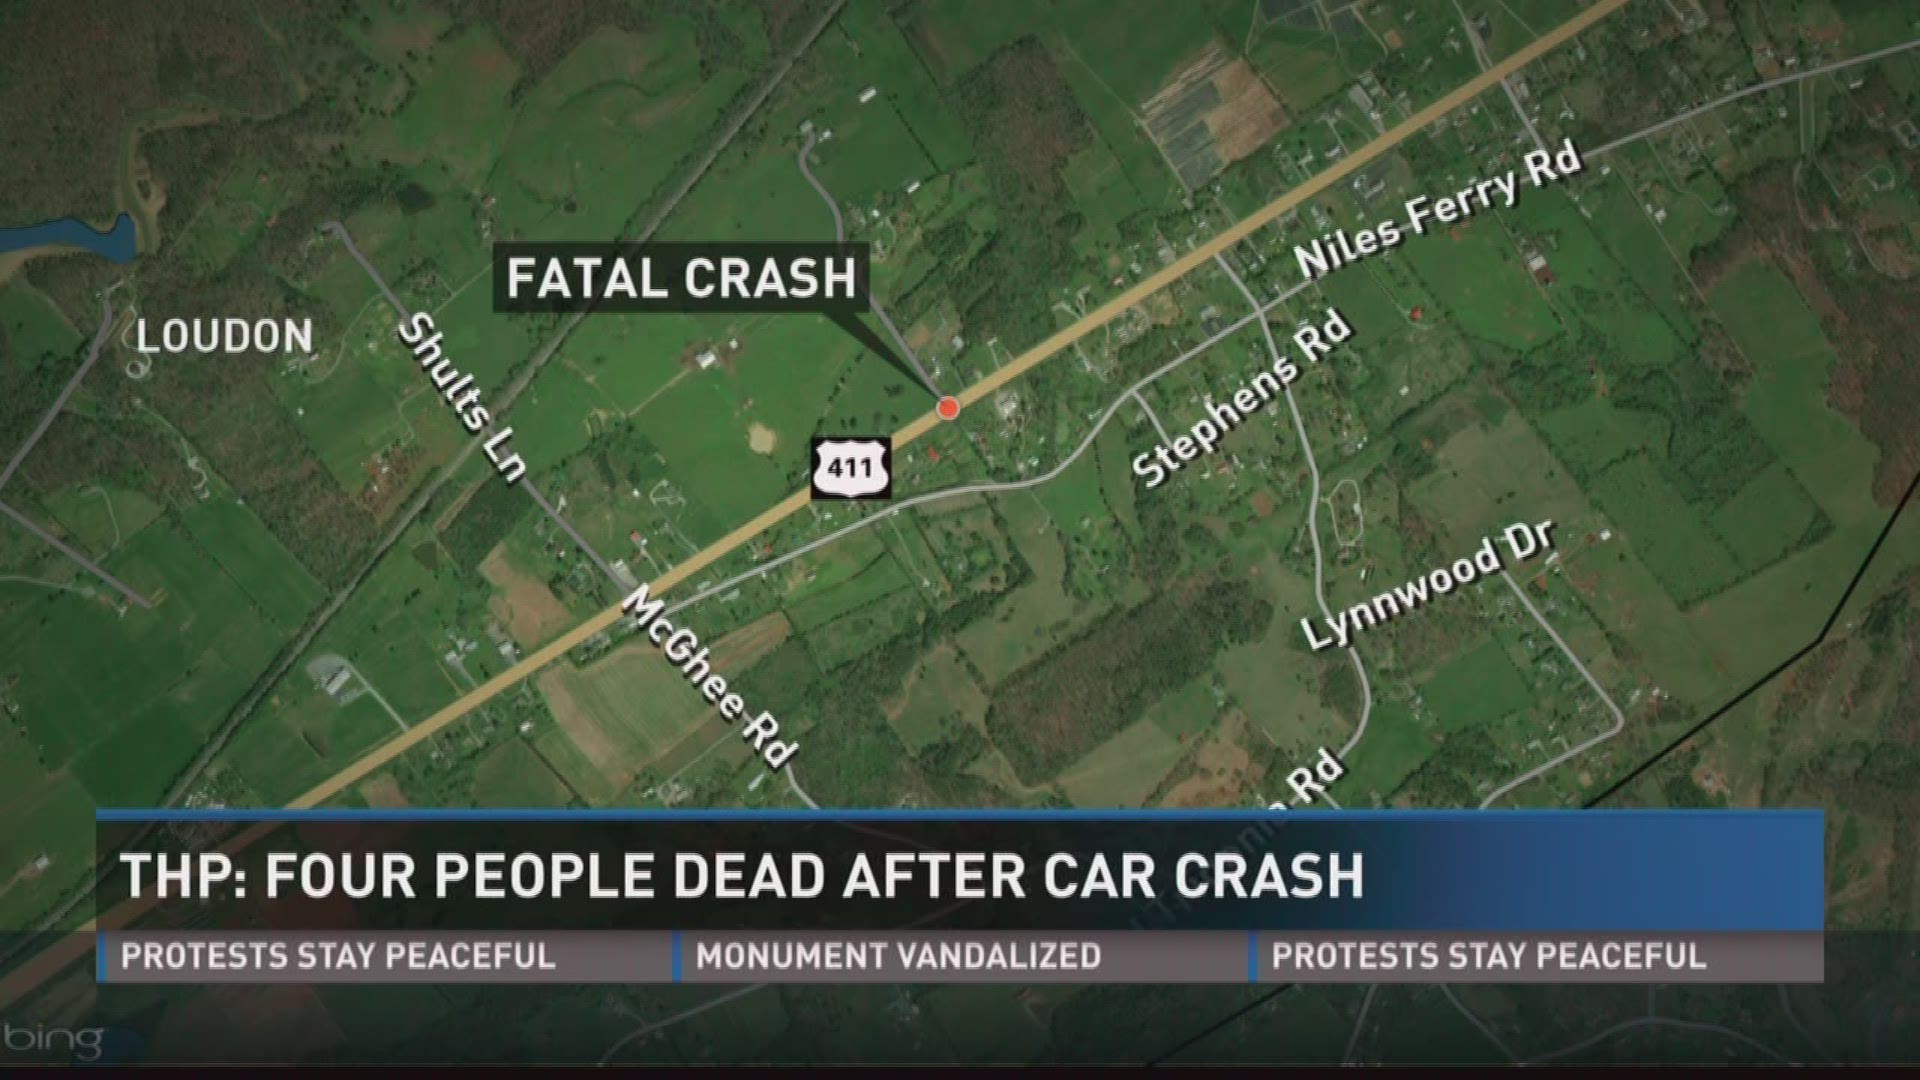 Four dead after crash on Highway 411 in Loudon County, according to THP.